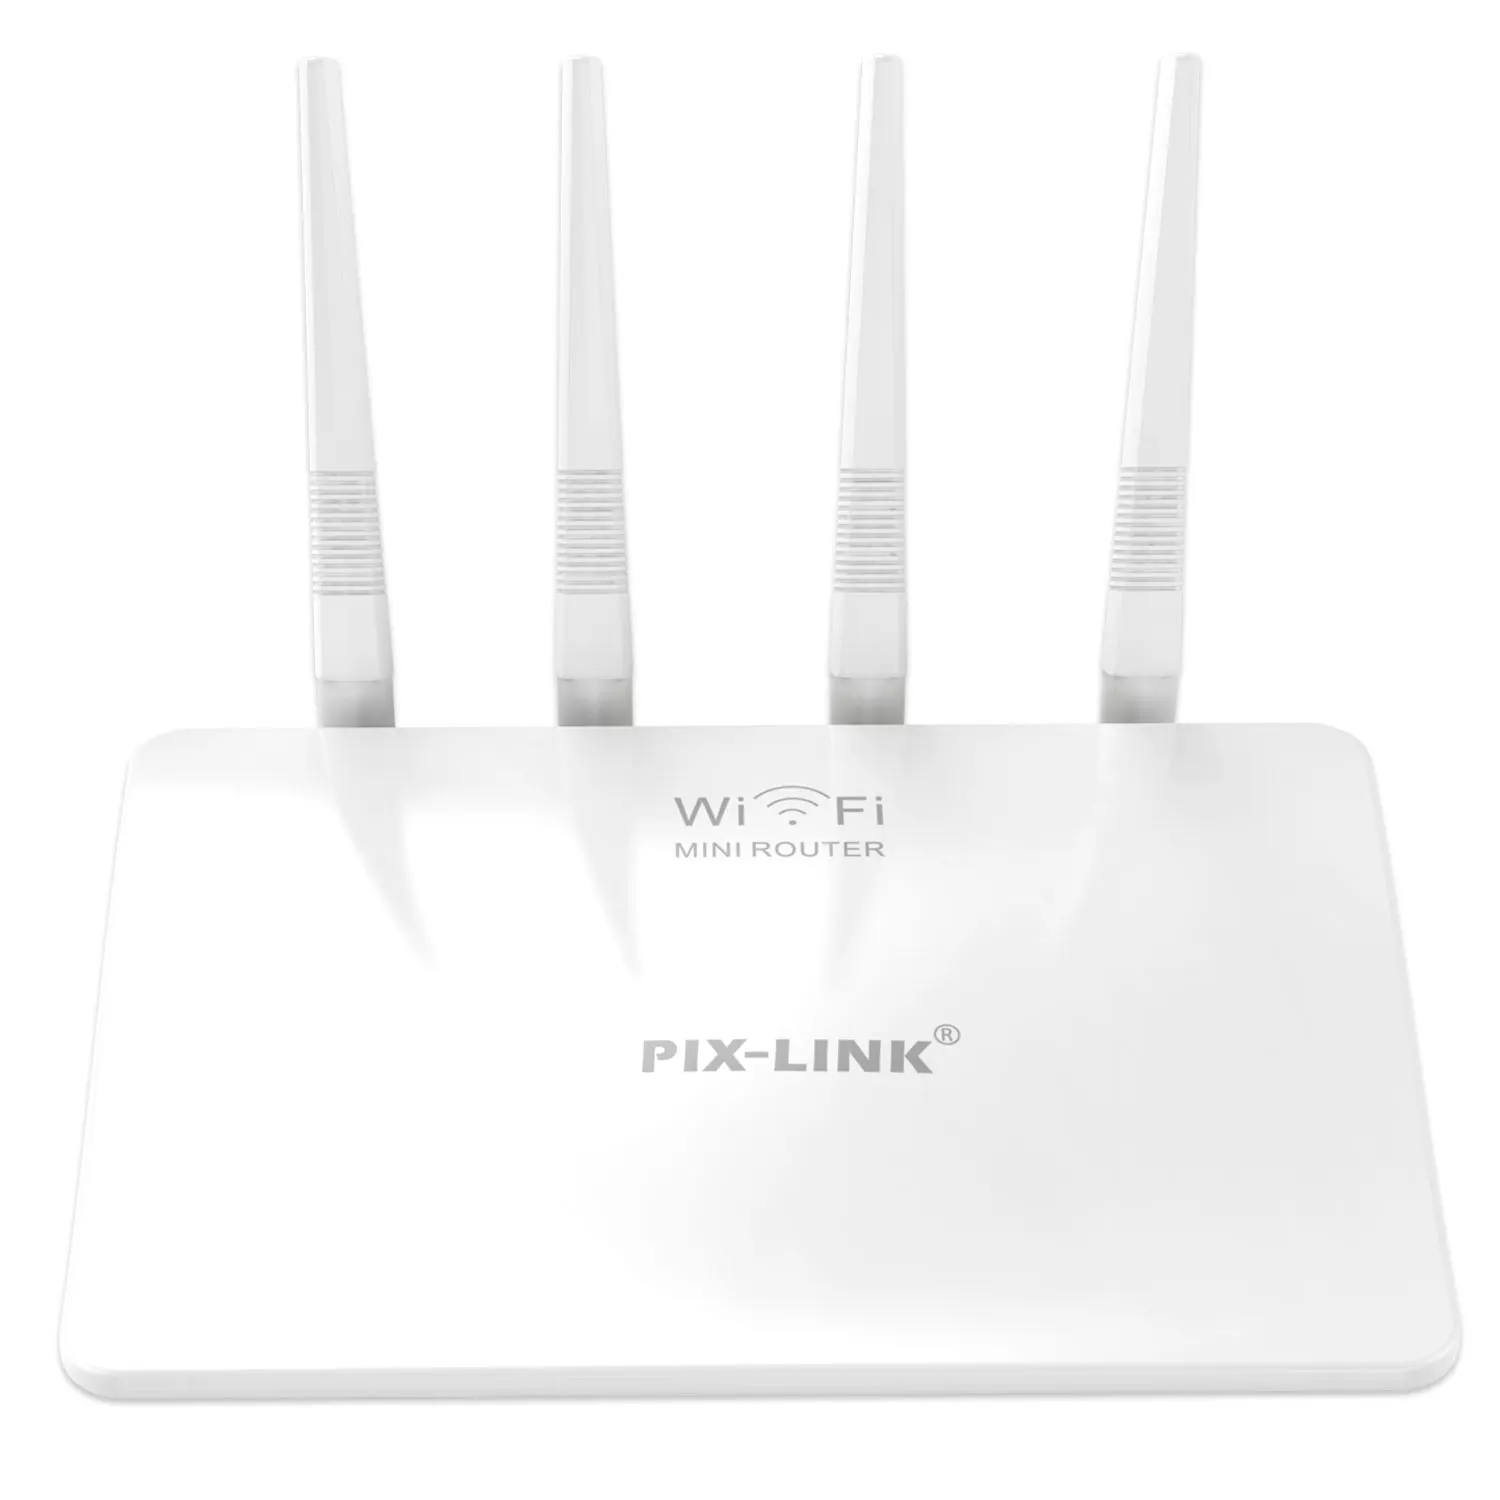 

Fsd Gc7 Wireless Repeater Mbps Home Dual Band Ac1200M High Quality 5Ghz Mbps 80211Ac Intelligent Network Wifi Router